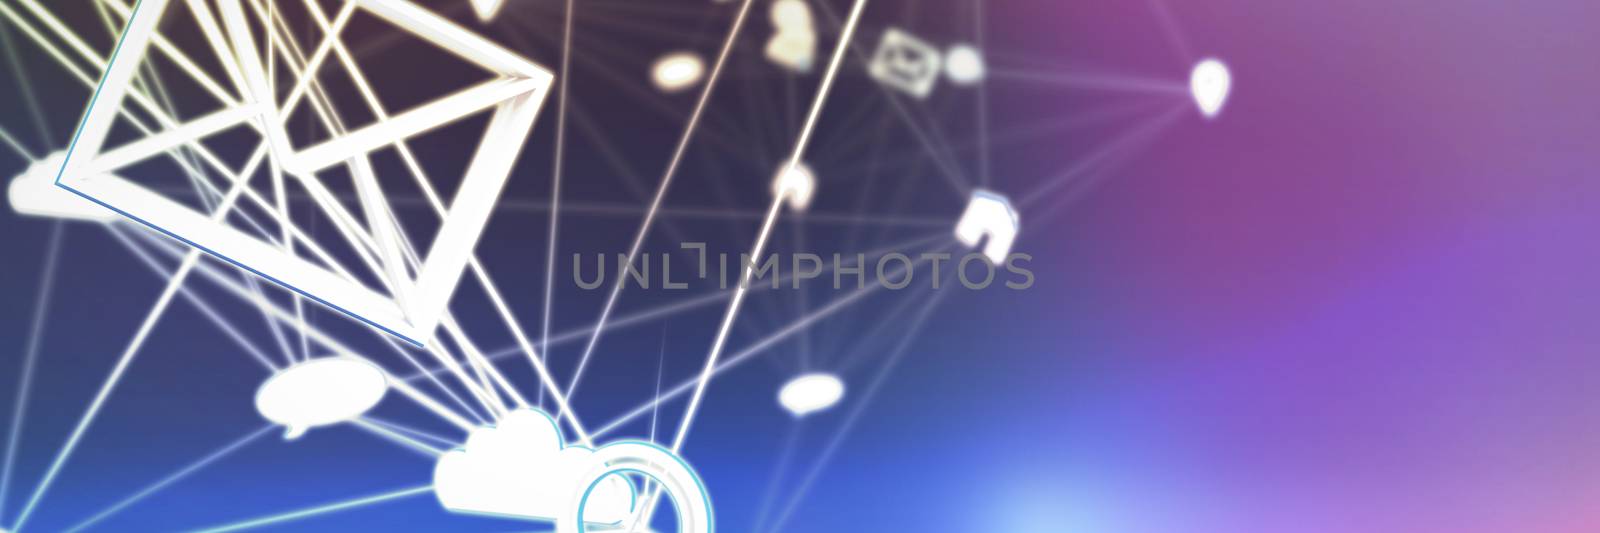 Lines connecting various networking icons against abstract blue background